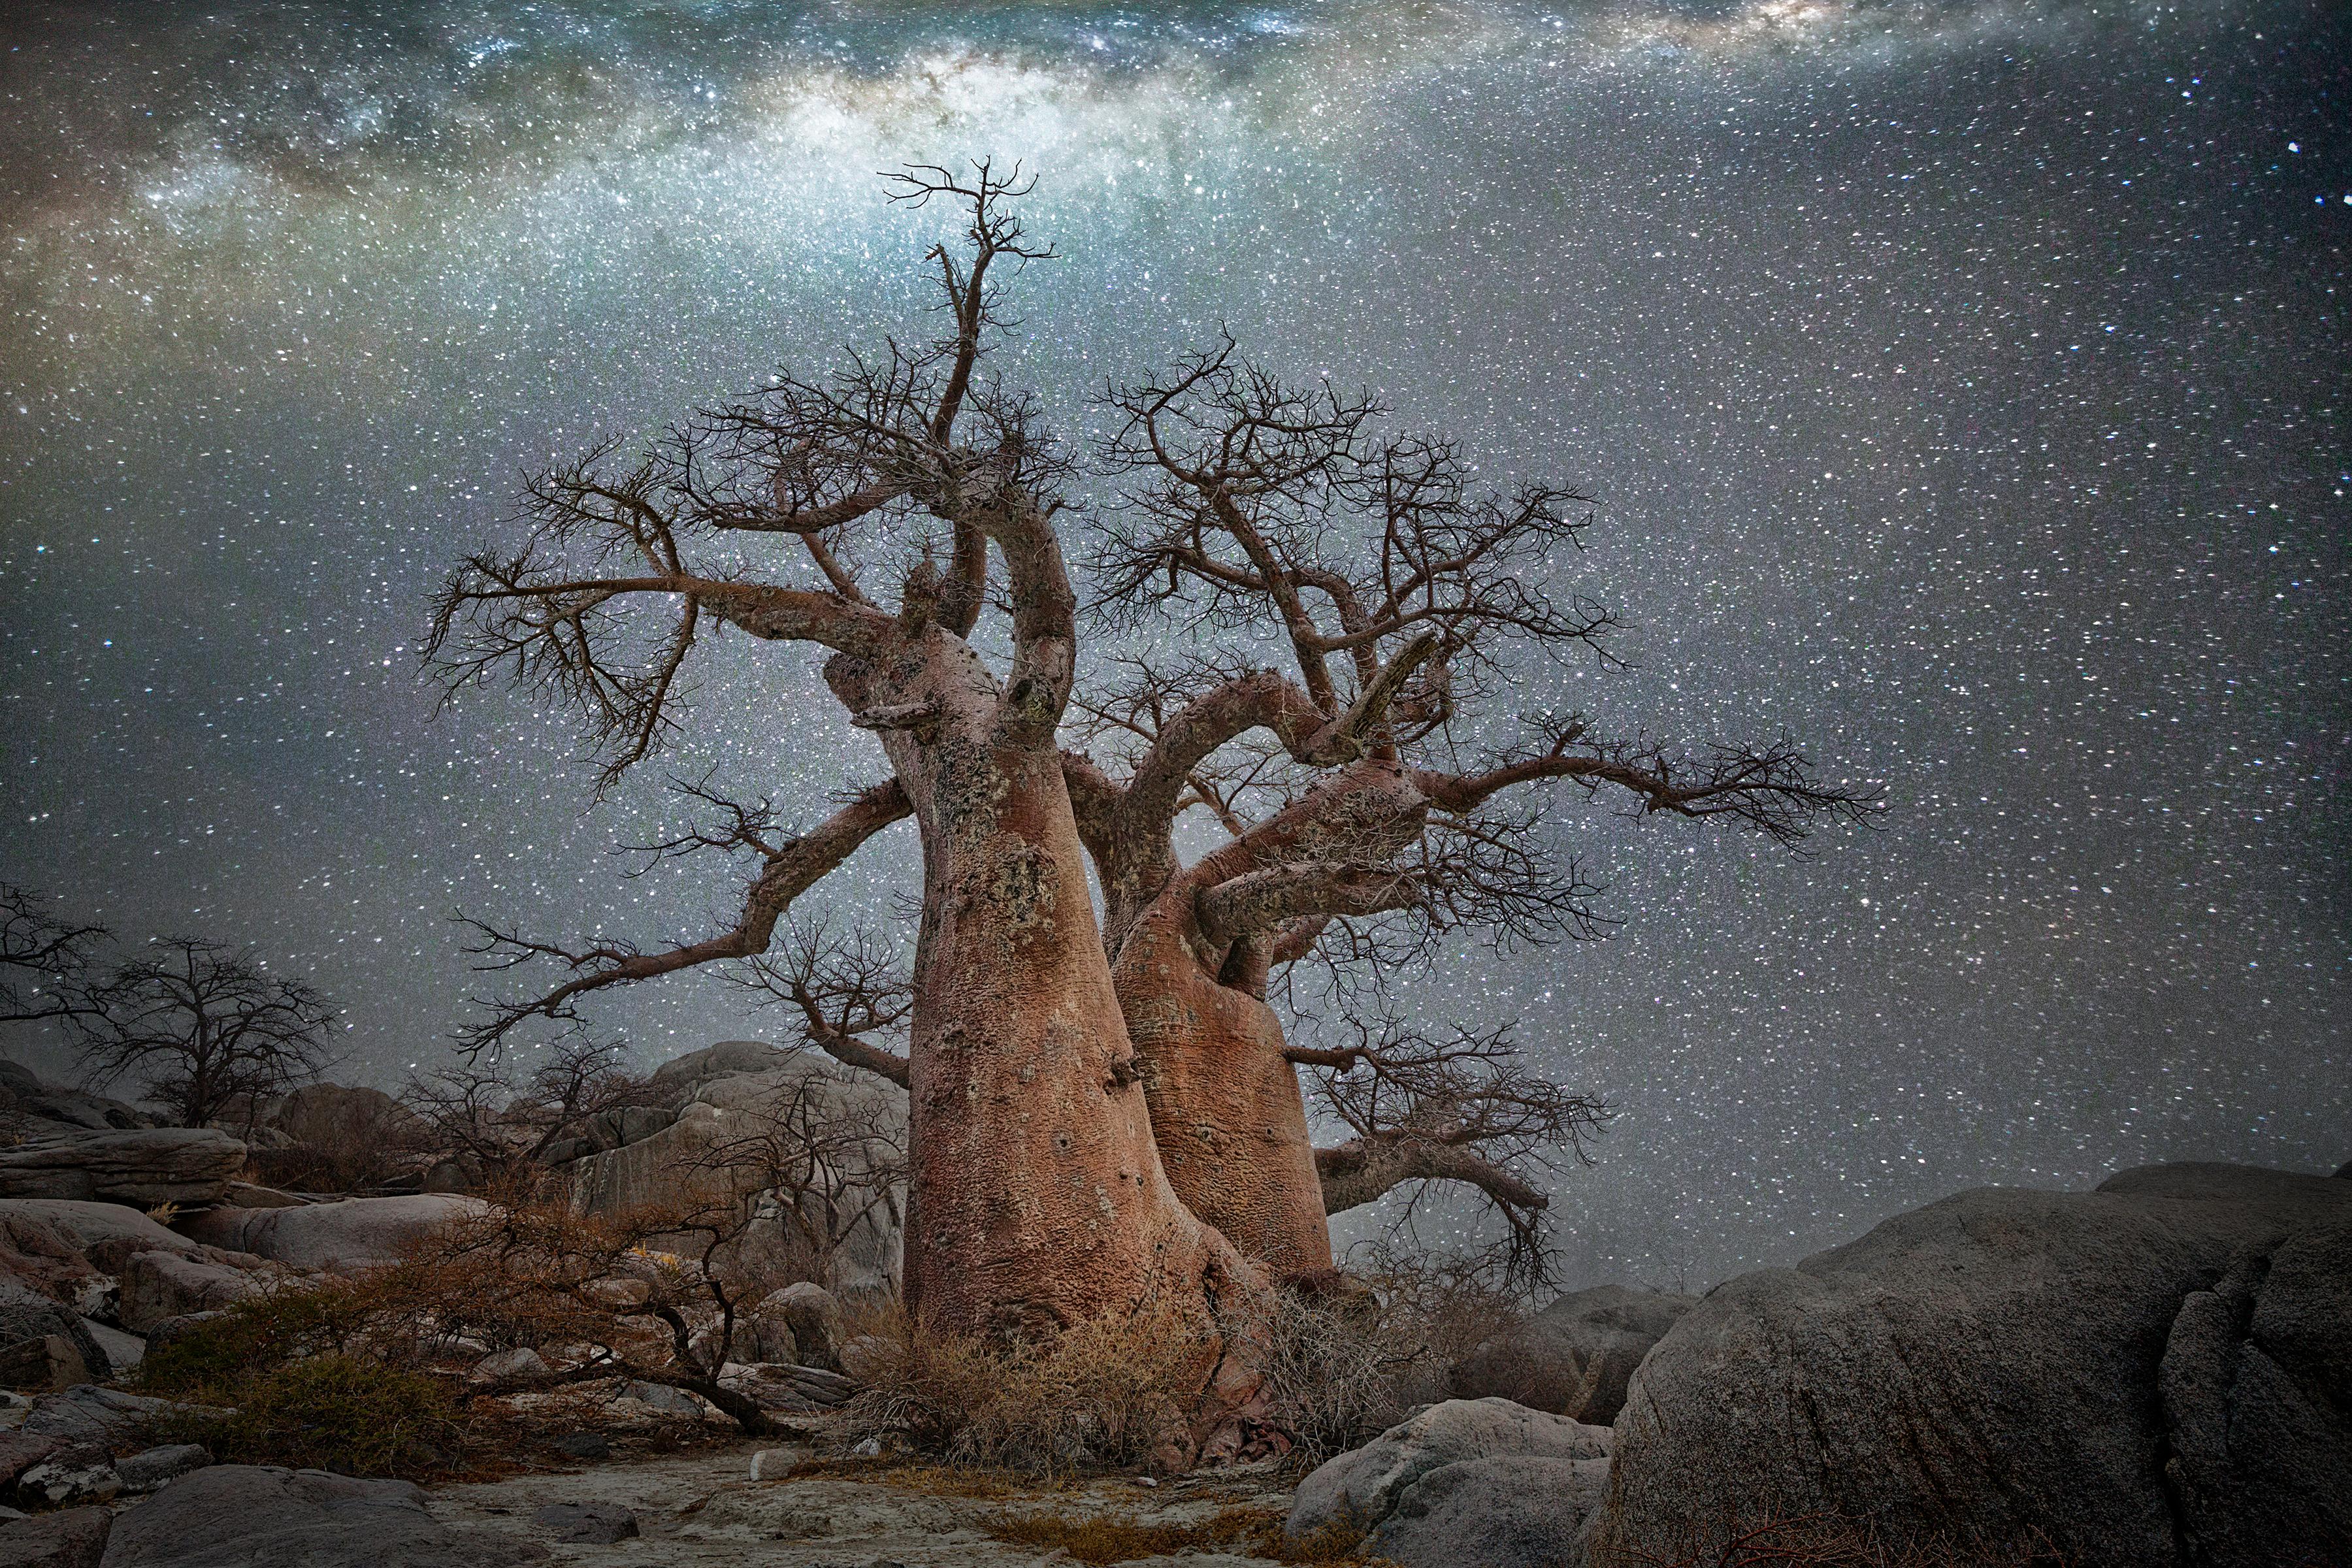 Beth Moon. From the Ancient Skies, Ancient Trees series. Archival pigment ink print. Signed, titled and editioned on print verso. 20 x 30", edition of 15. 